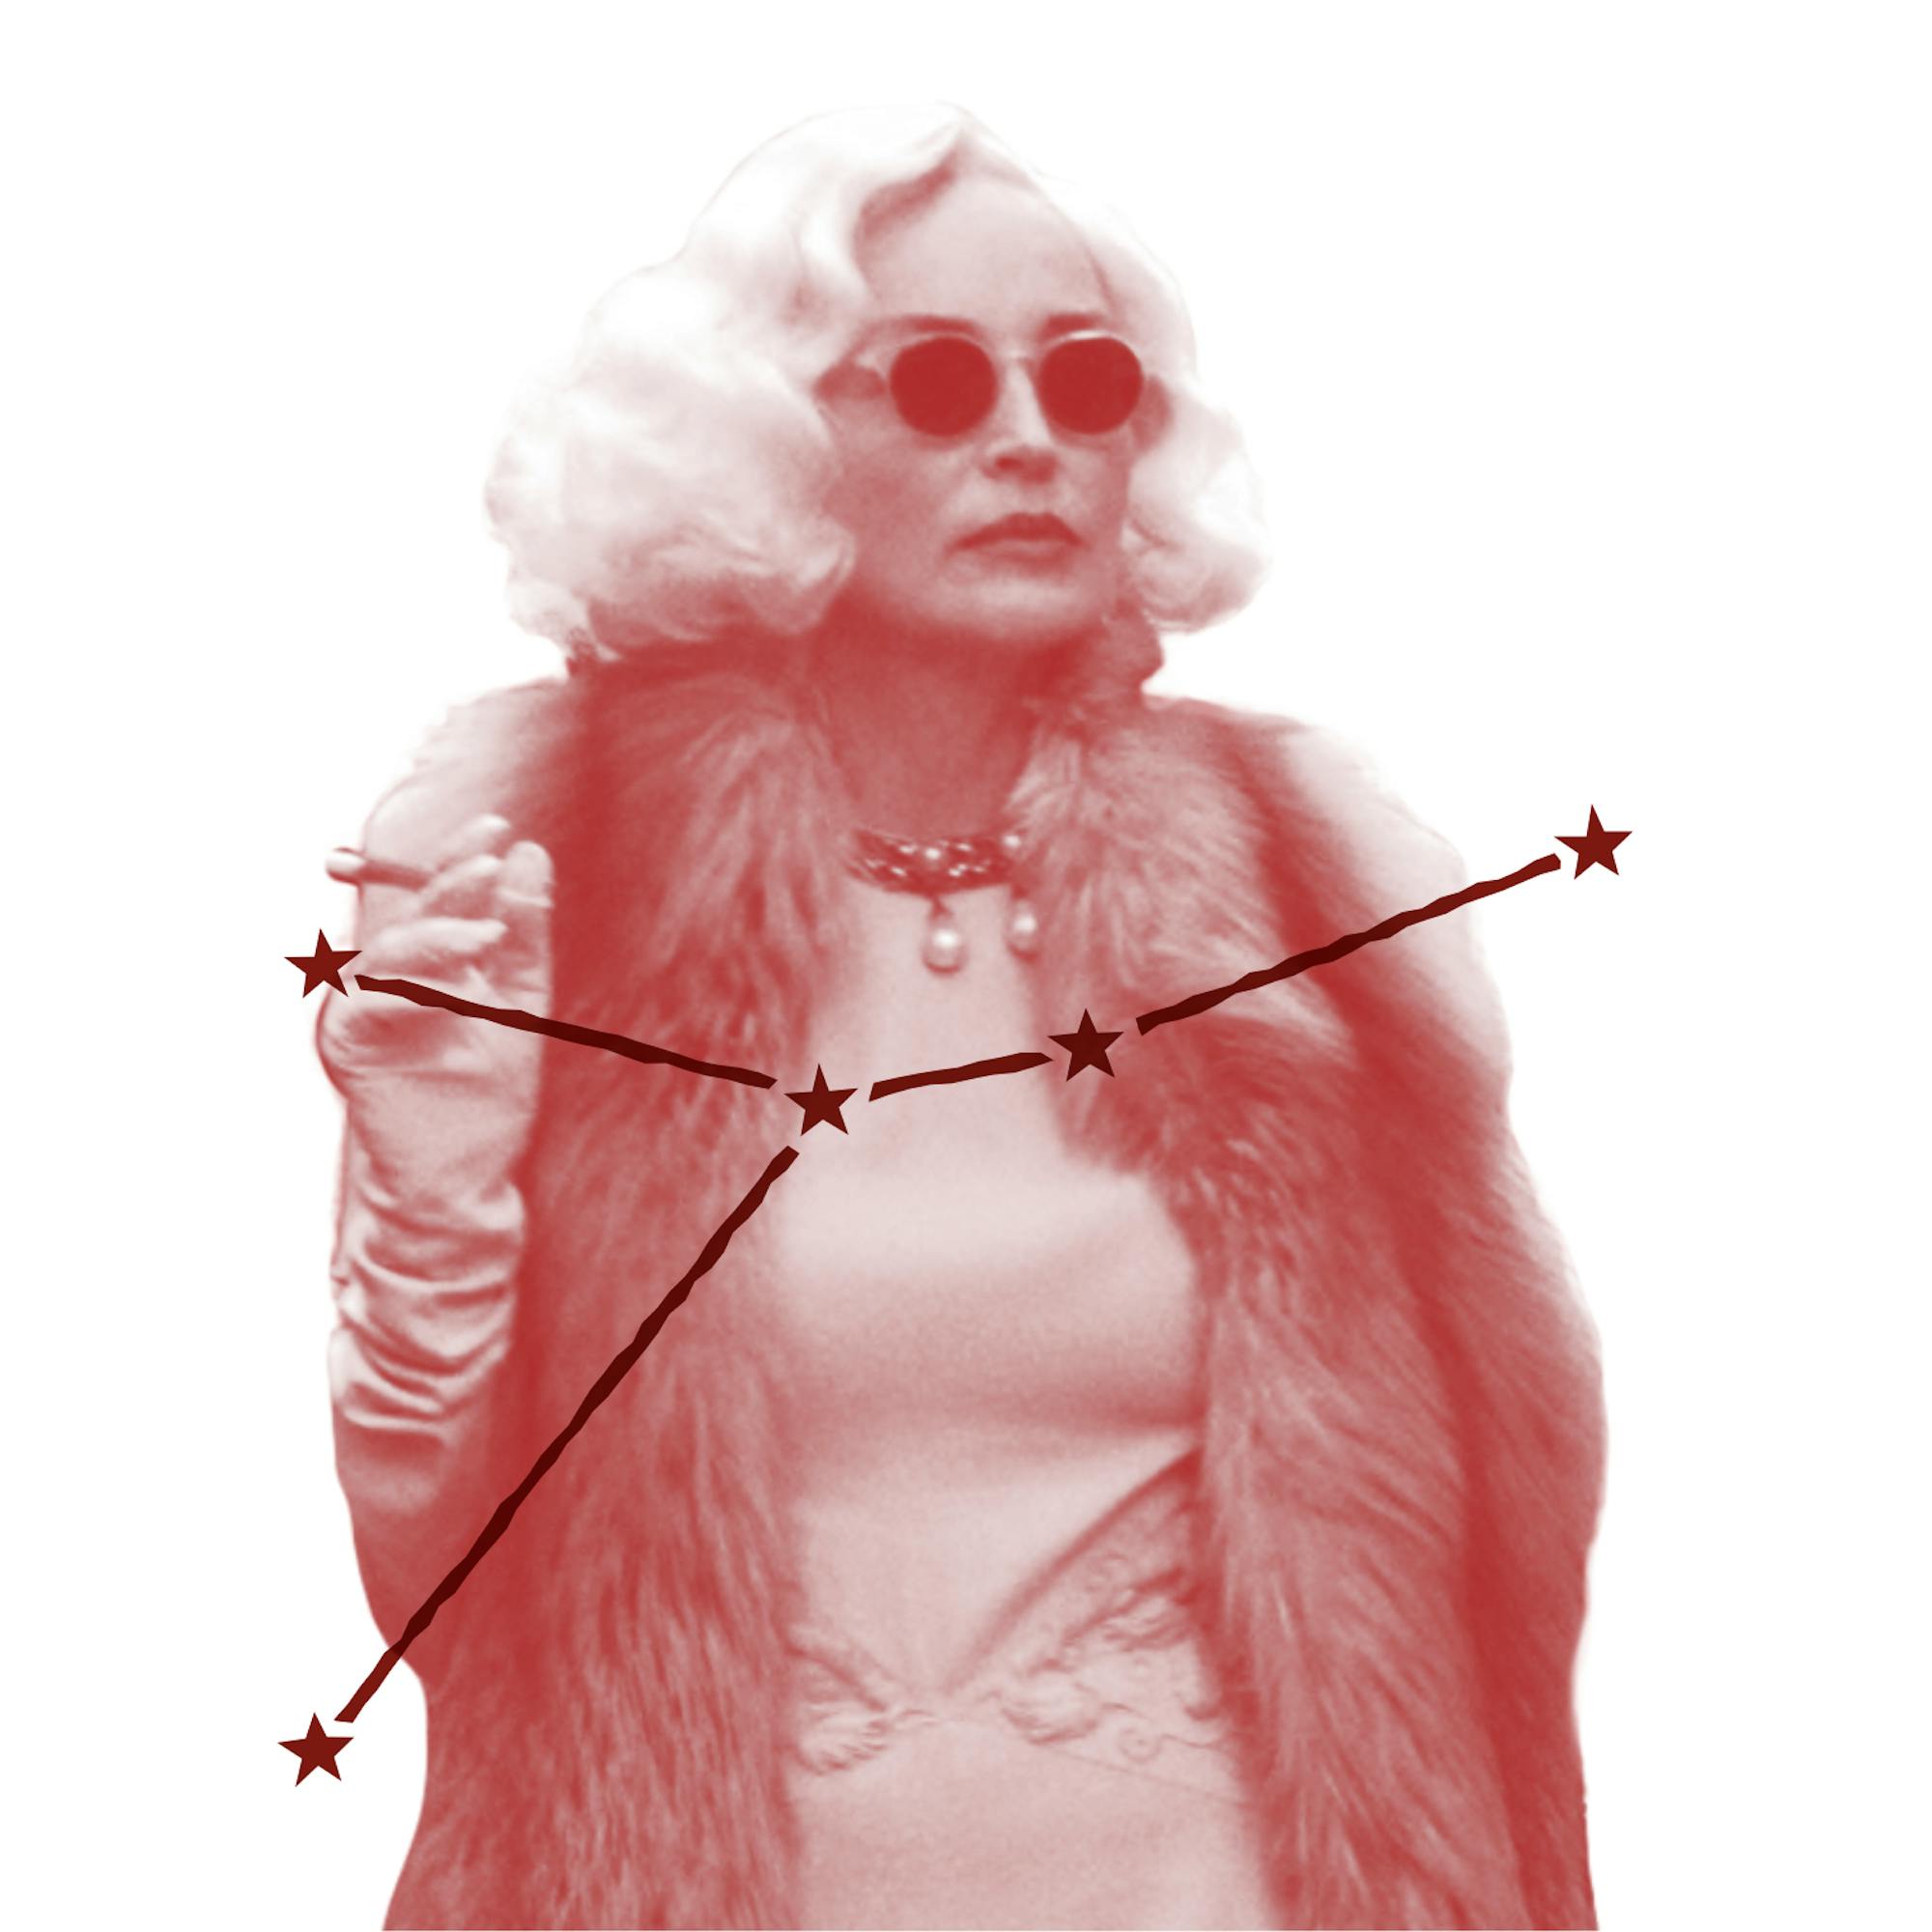 Lenore Osgood (played by Sharon Stone) is chic and tremendously camp in this still from Ratched. She wears white gloves that match her platinum bob, plus furs, pearls, and a pair of sunglasses. (But where’s the monkey?) Over the image is an illustration of Lenore’s zodiac constellation.